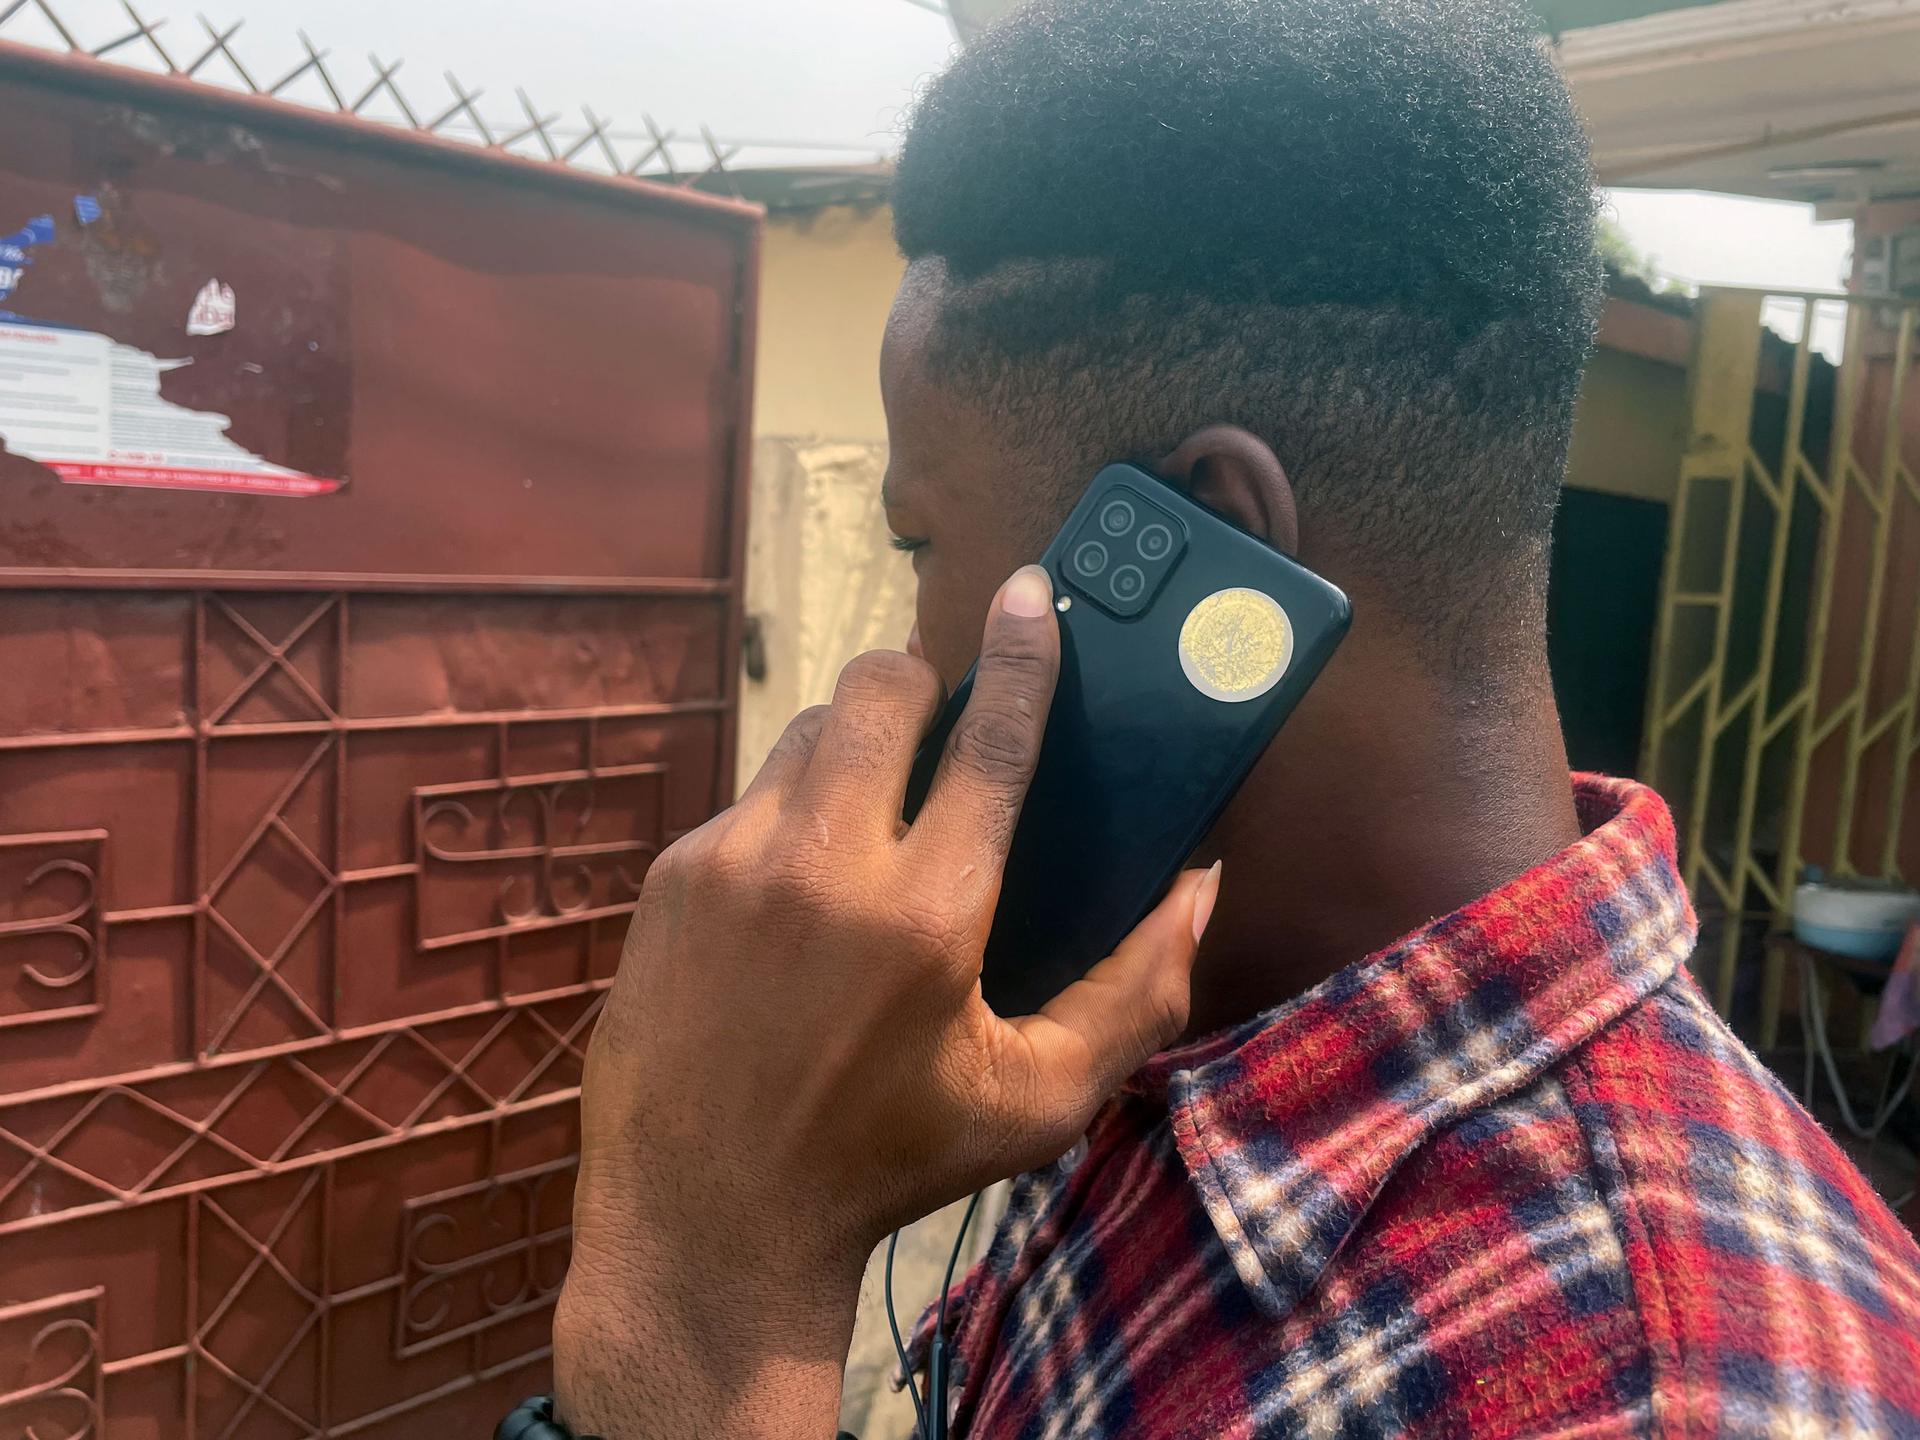 Ghana has over 40 million mobile phone subscribers, according to government data.